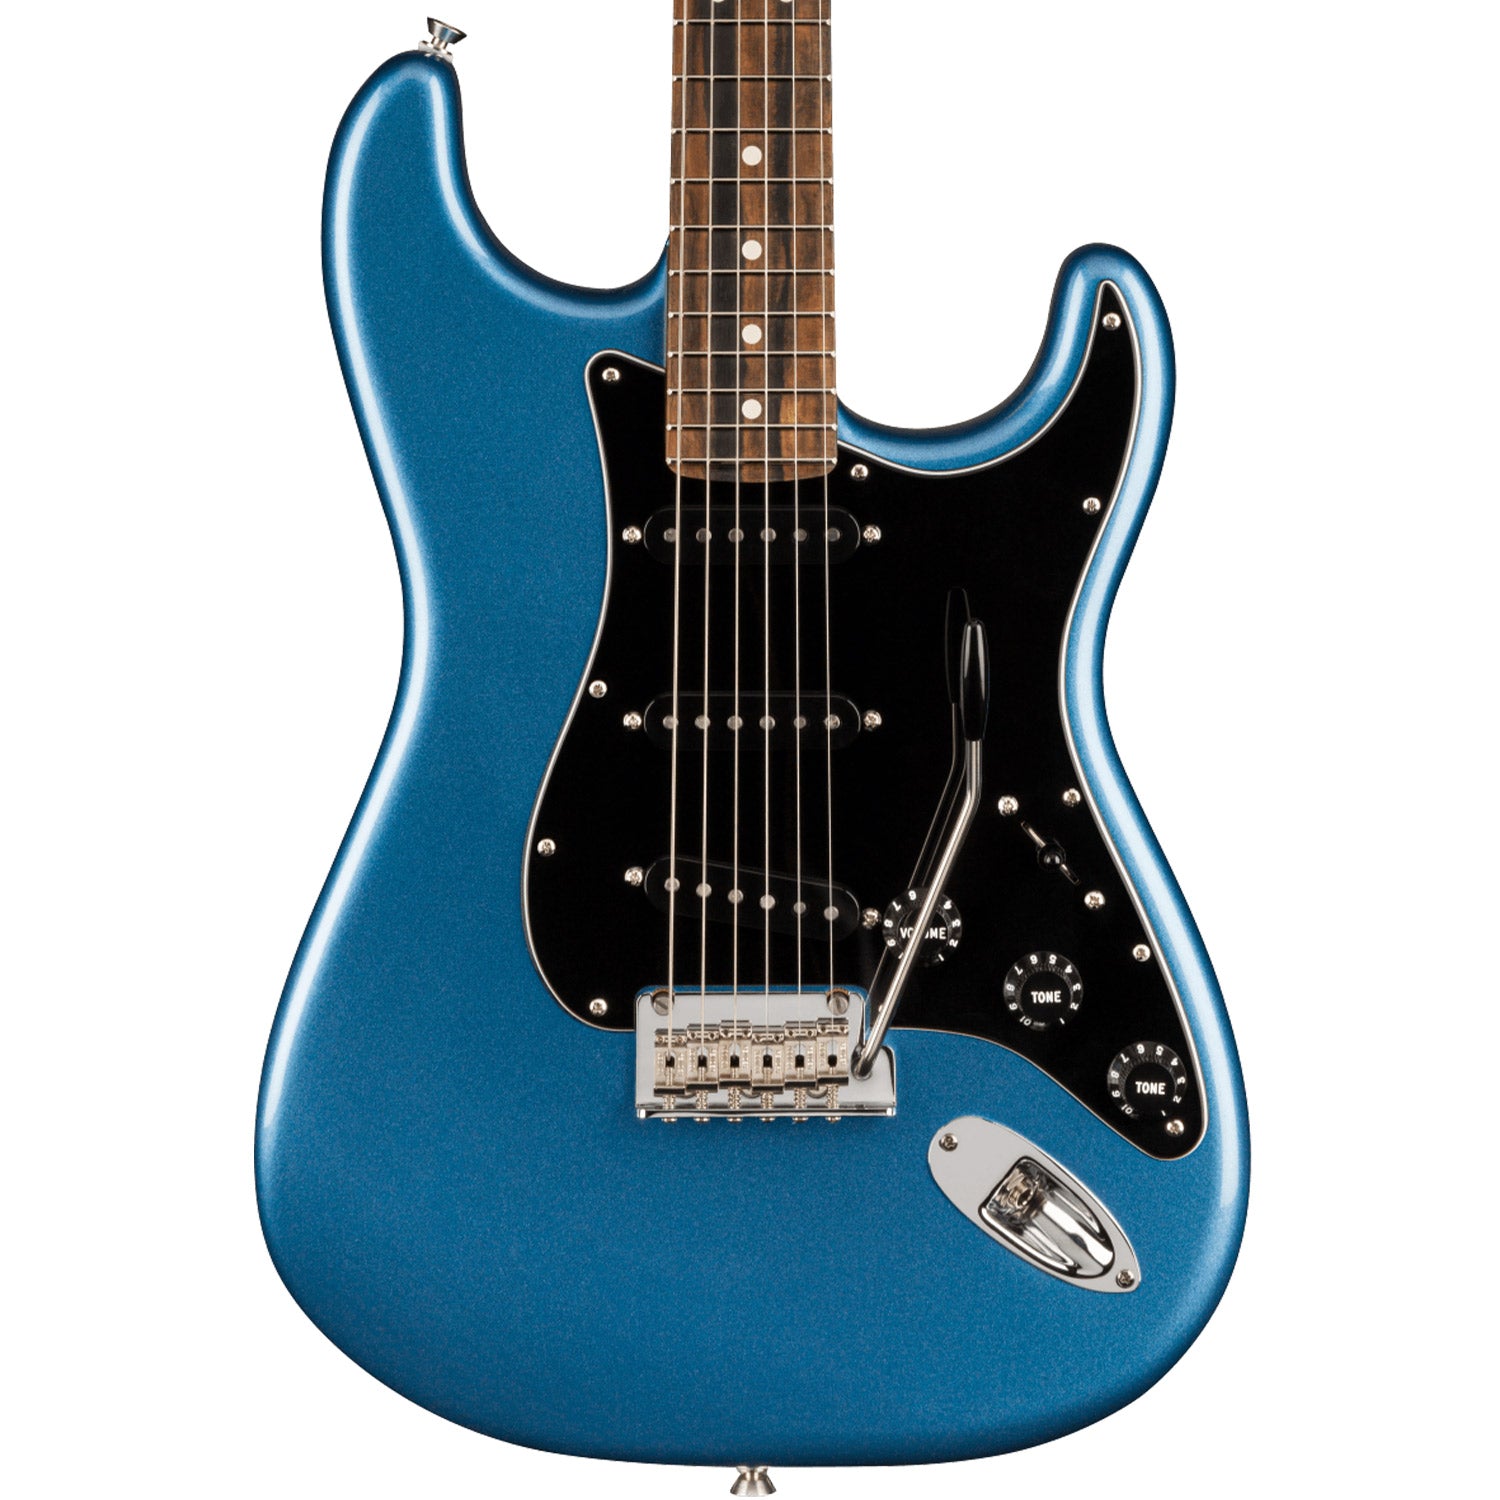 Fender Limited Edition Player Stratocaster with Maple FB in Lake Placid Blue